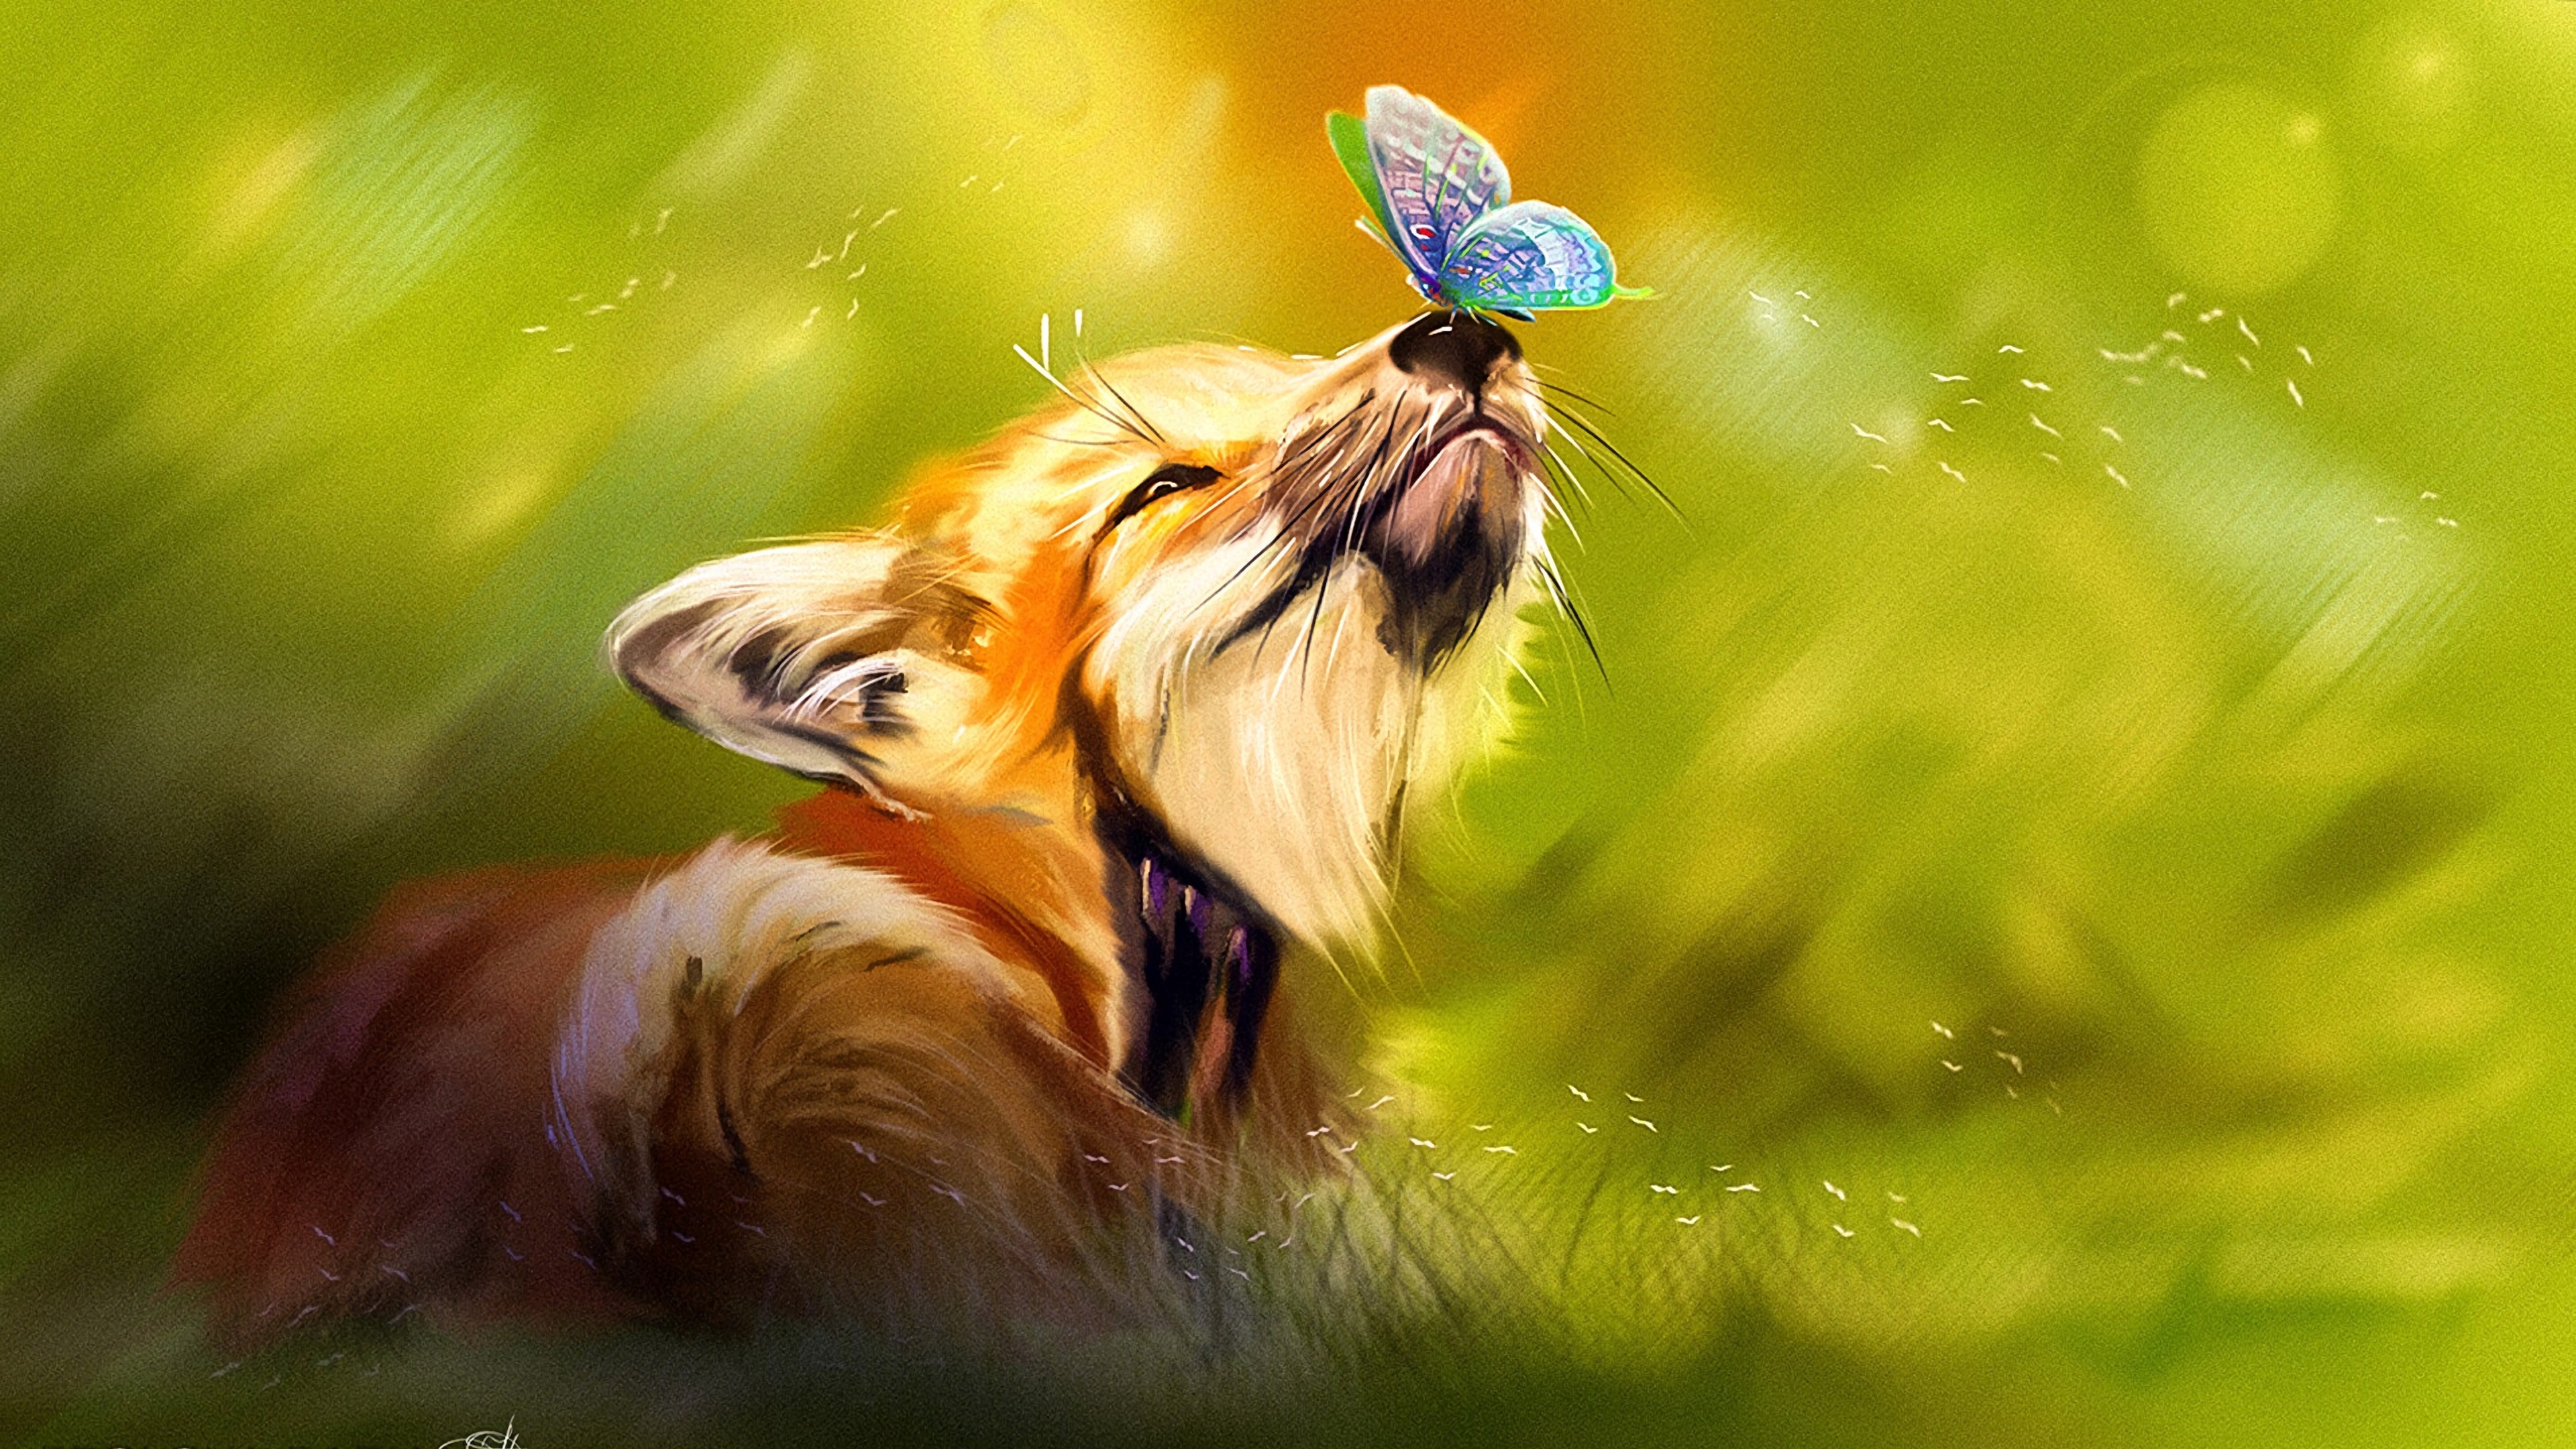 Fox and Butterfly 4K wallpaper